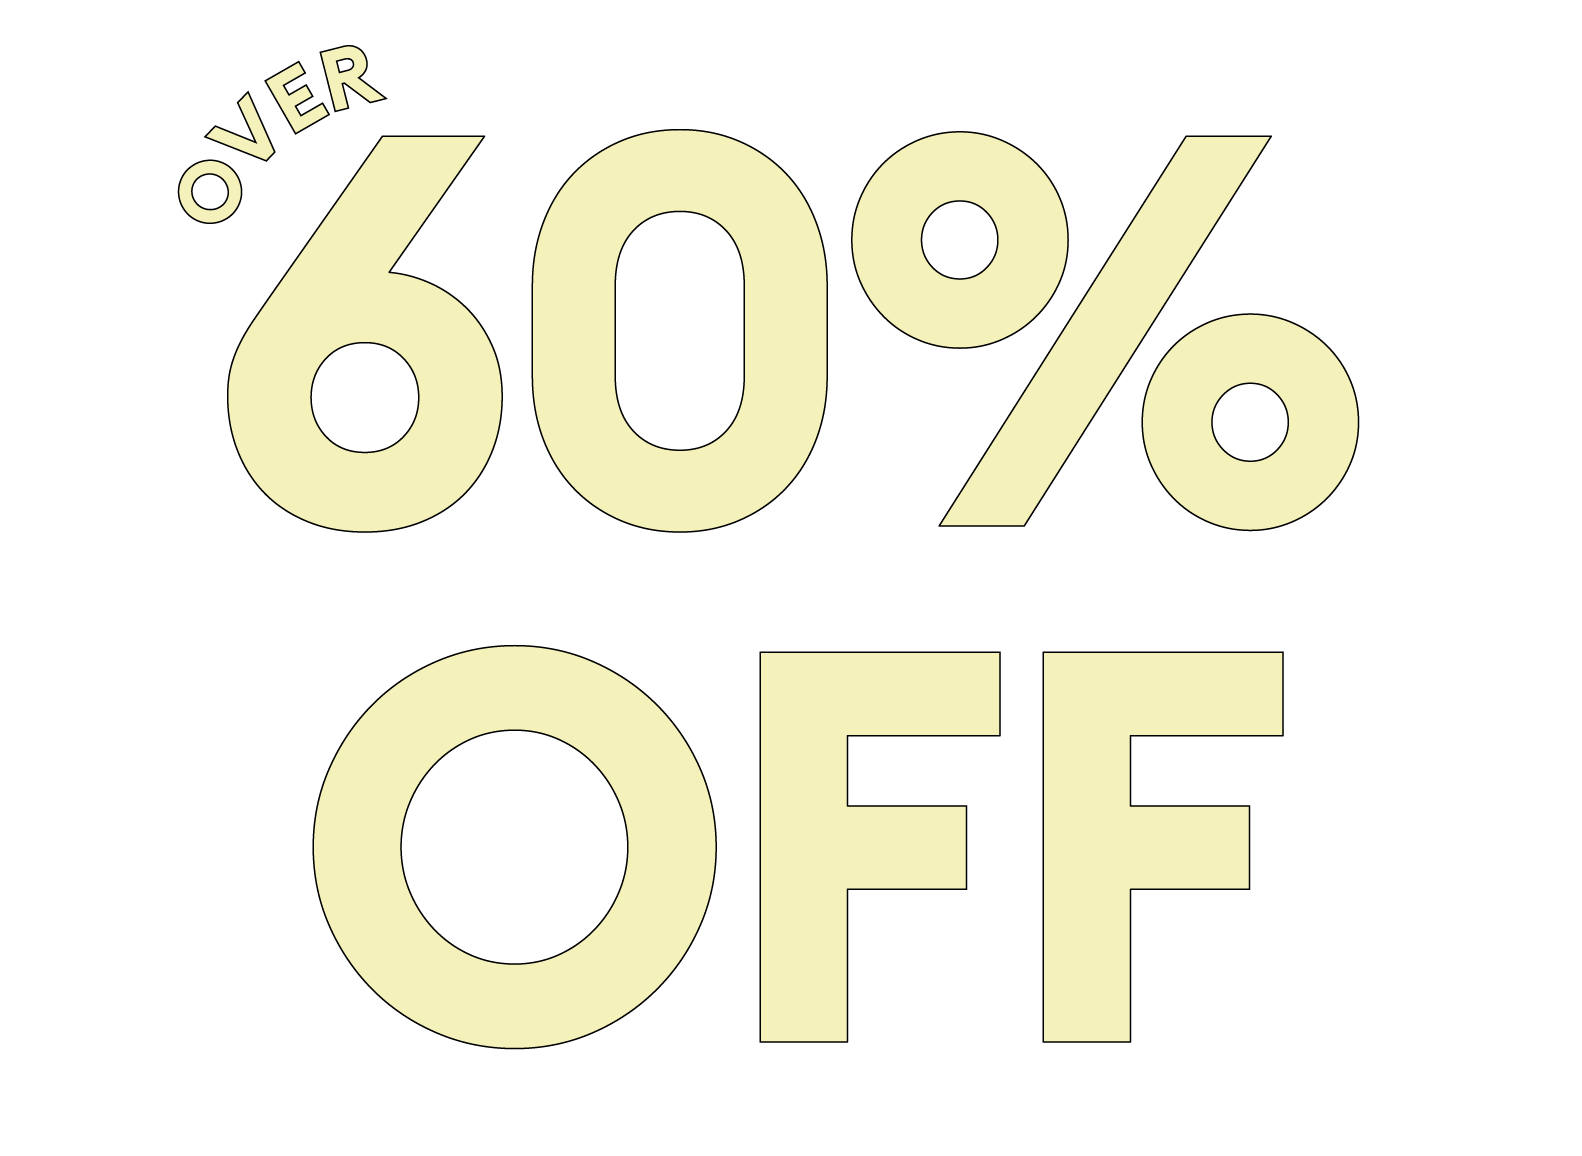 Over 60% off